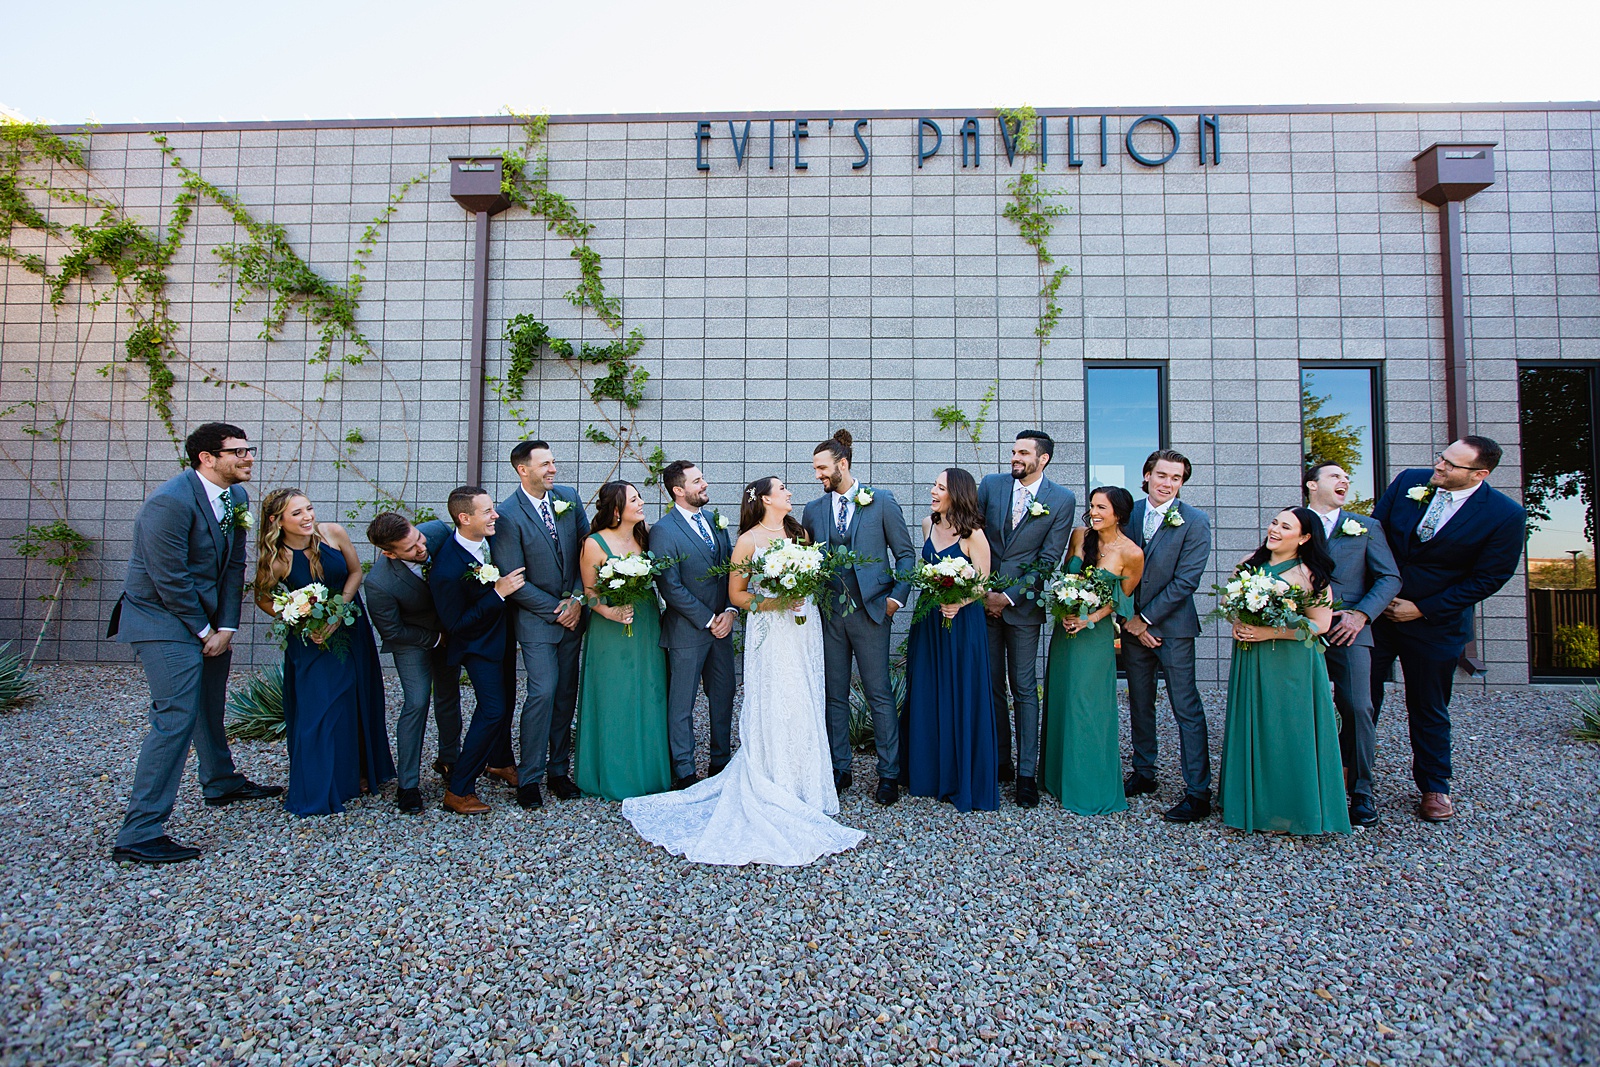 Mixed gender bridal party laughing together at Papago Events wedding by Phoenix wedding photographer PMA Photography.